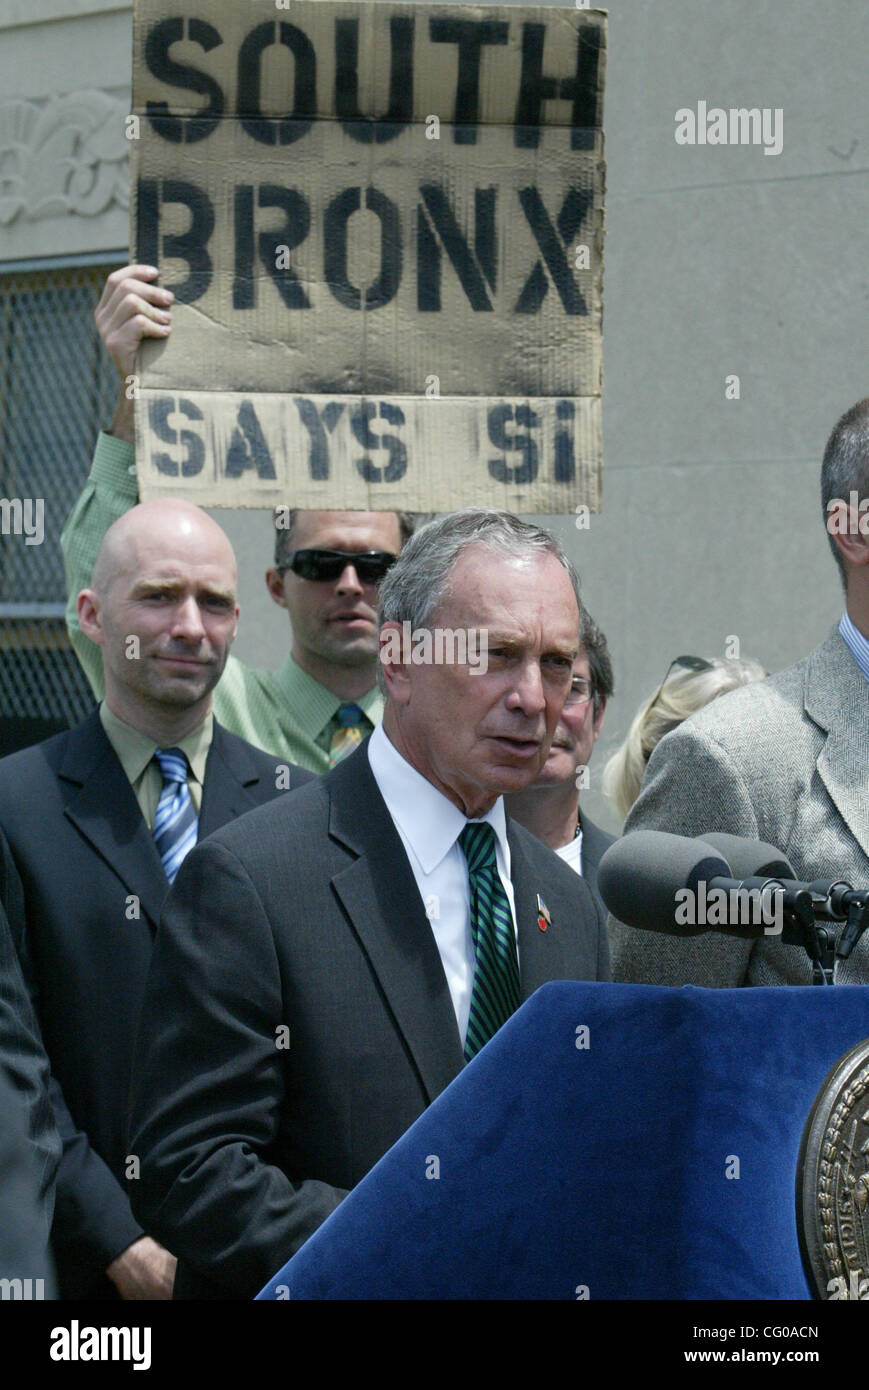 Mayor Michael Bloomberg joined Assemblymember Jose Rivera, Borough president Adolfo Carrion and council members as they endosed PlaNYC at the Bronx County courthouse. Photo credit: Mariela Lombard/ ZUMA Press. Stock Photo